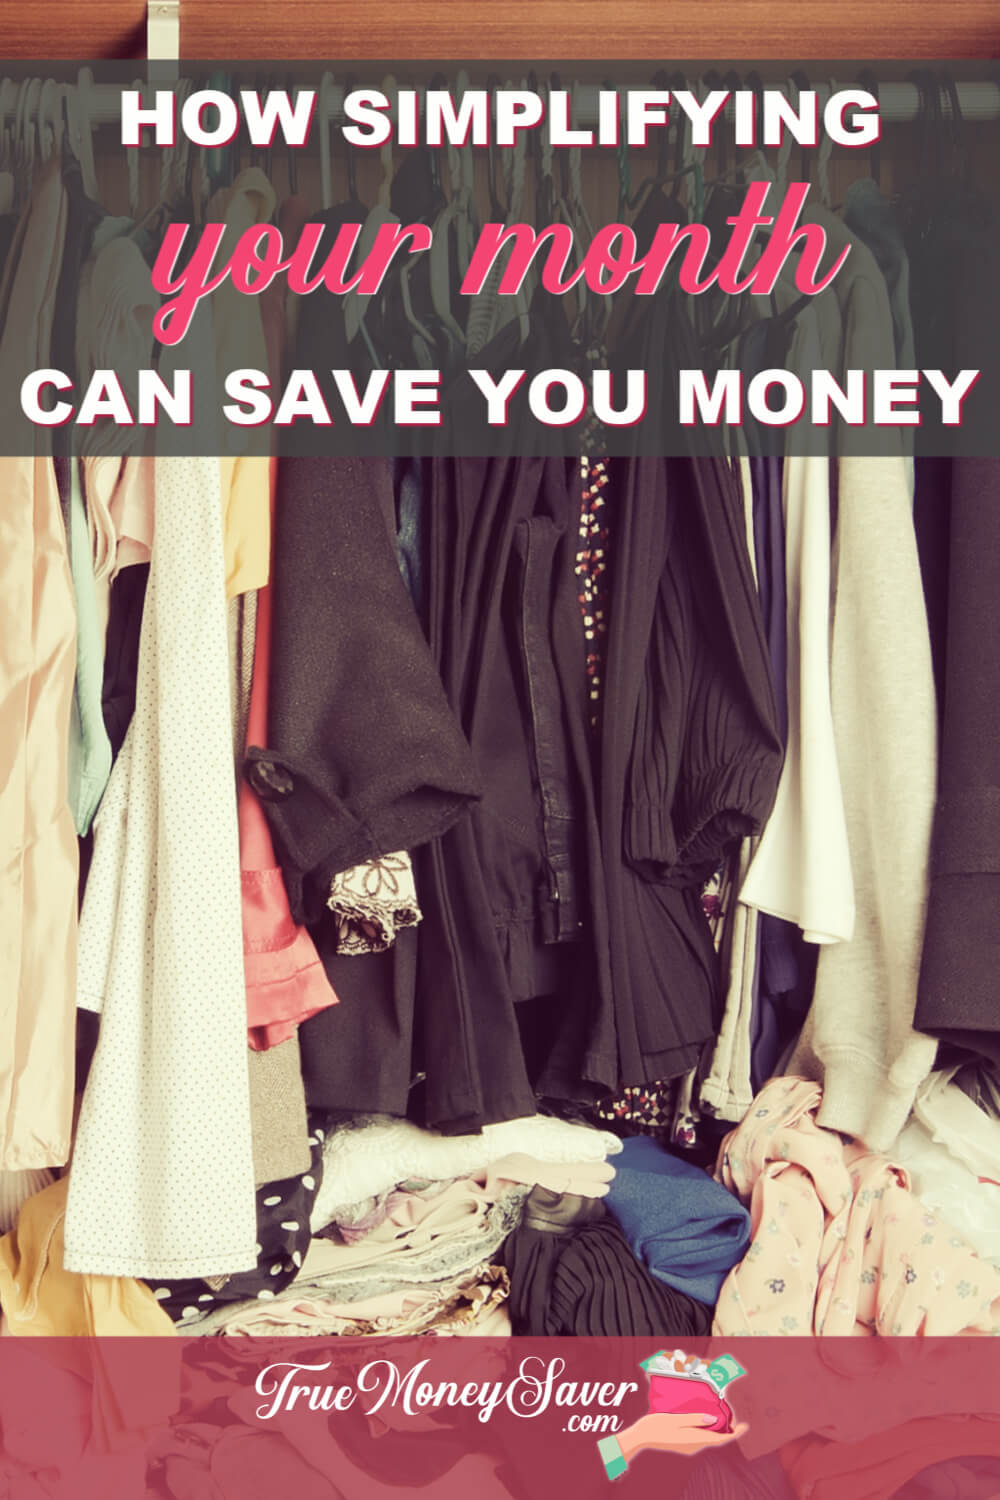 How Simplifying Your Month Can Save You Money